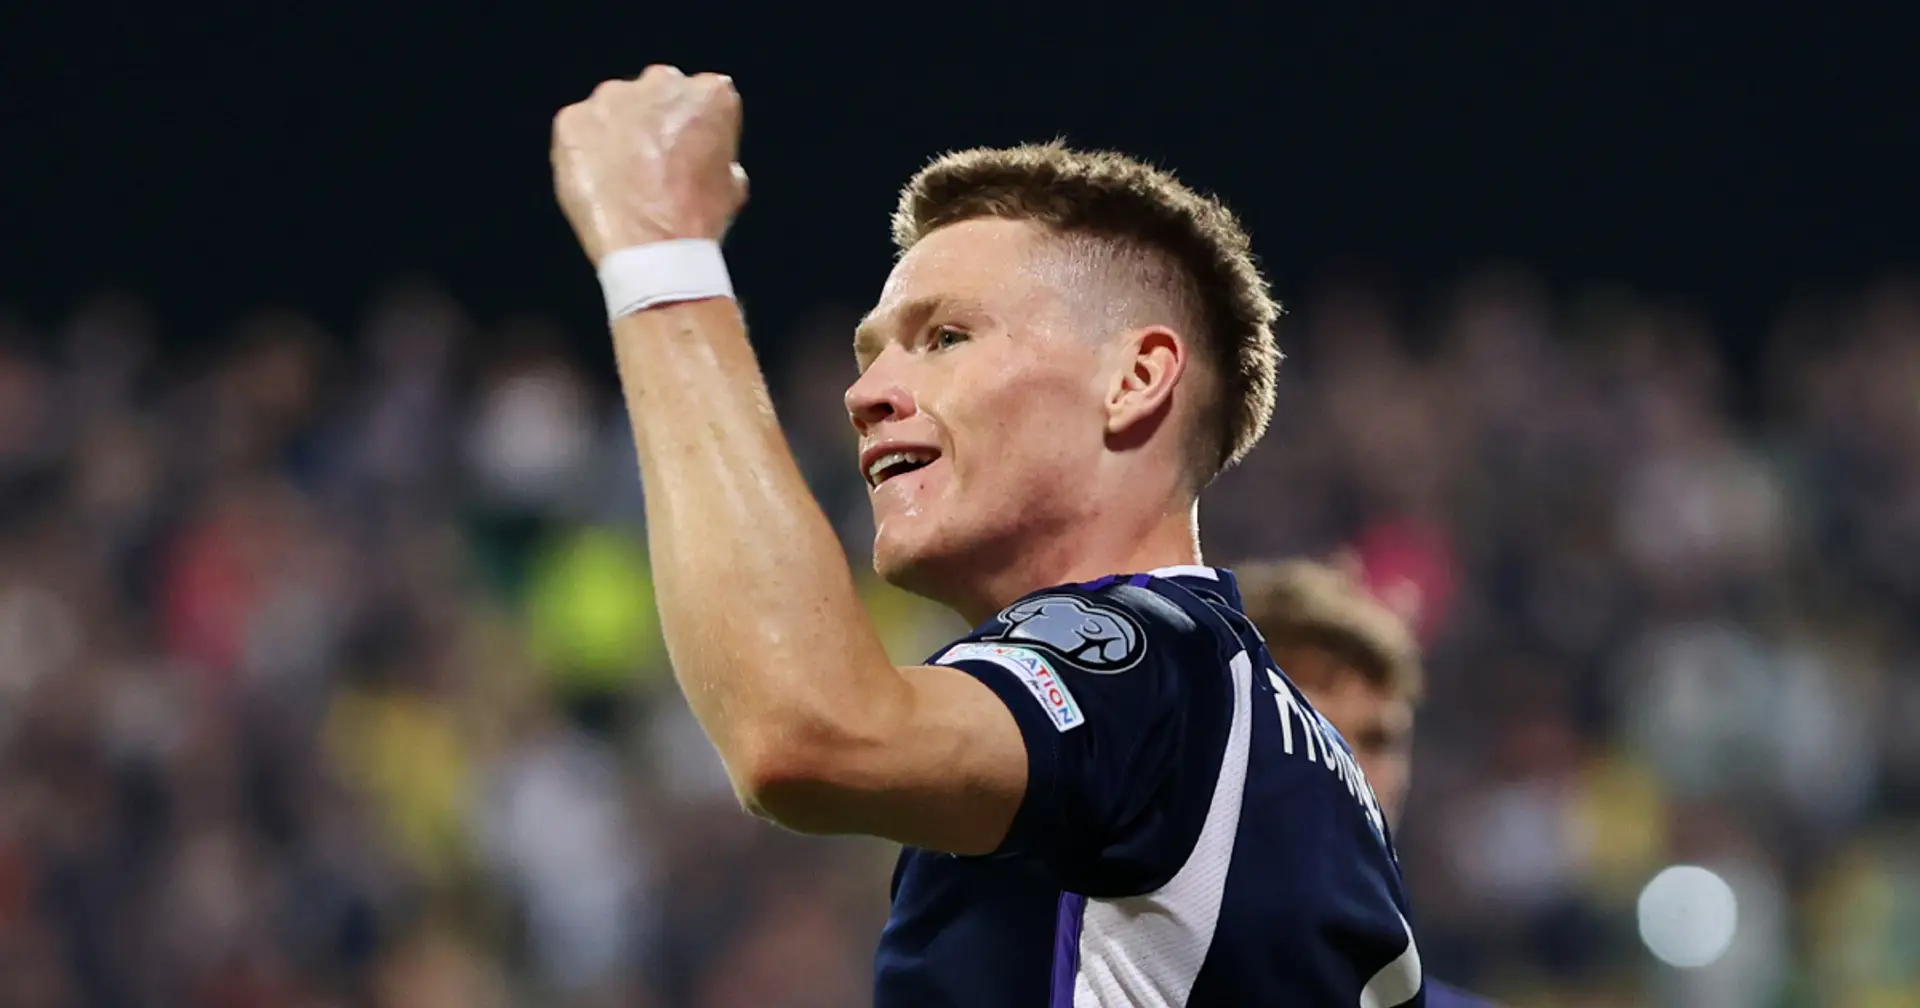 'We've seen enough of him': Man United fans not impressed by McTominay's Scotland heroics